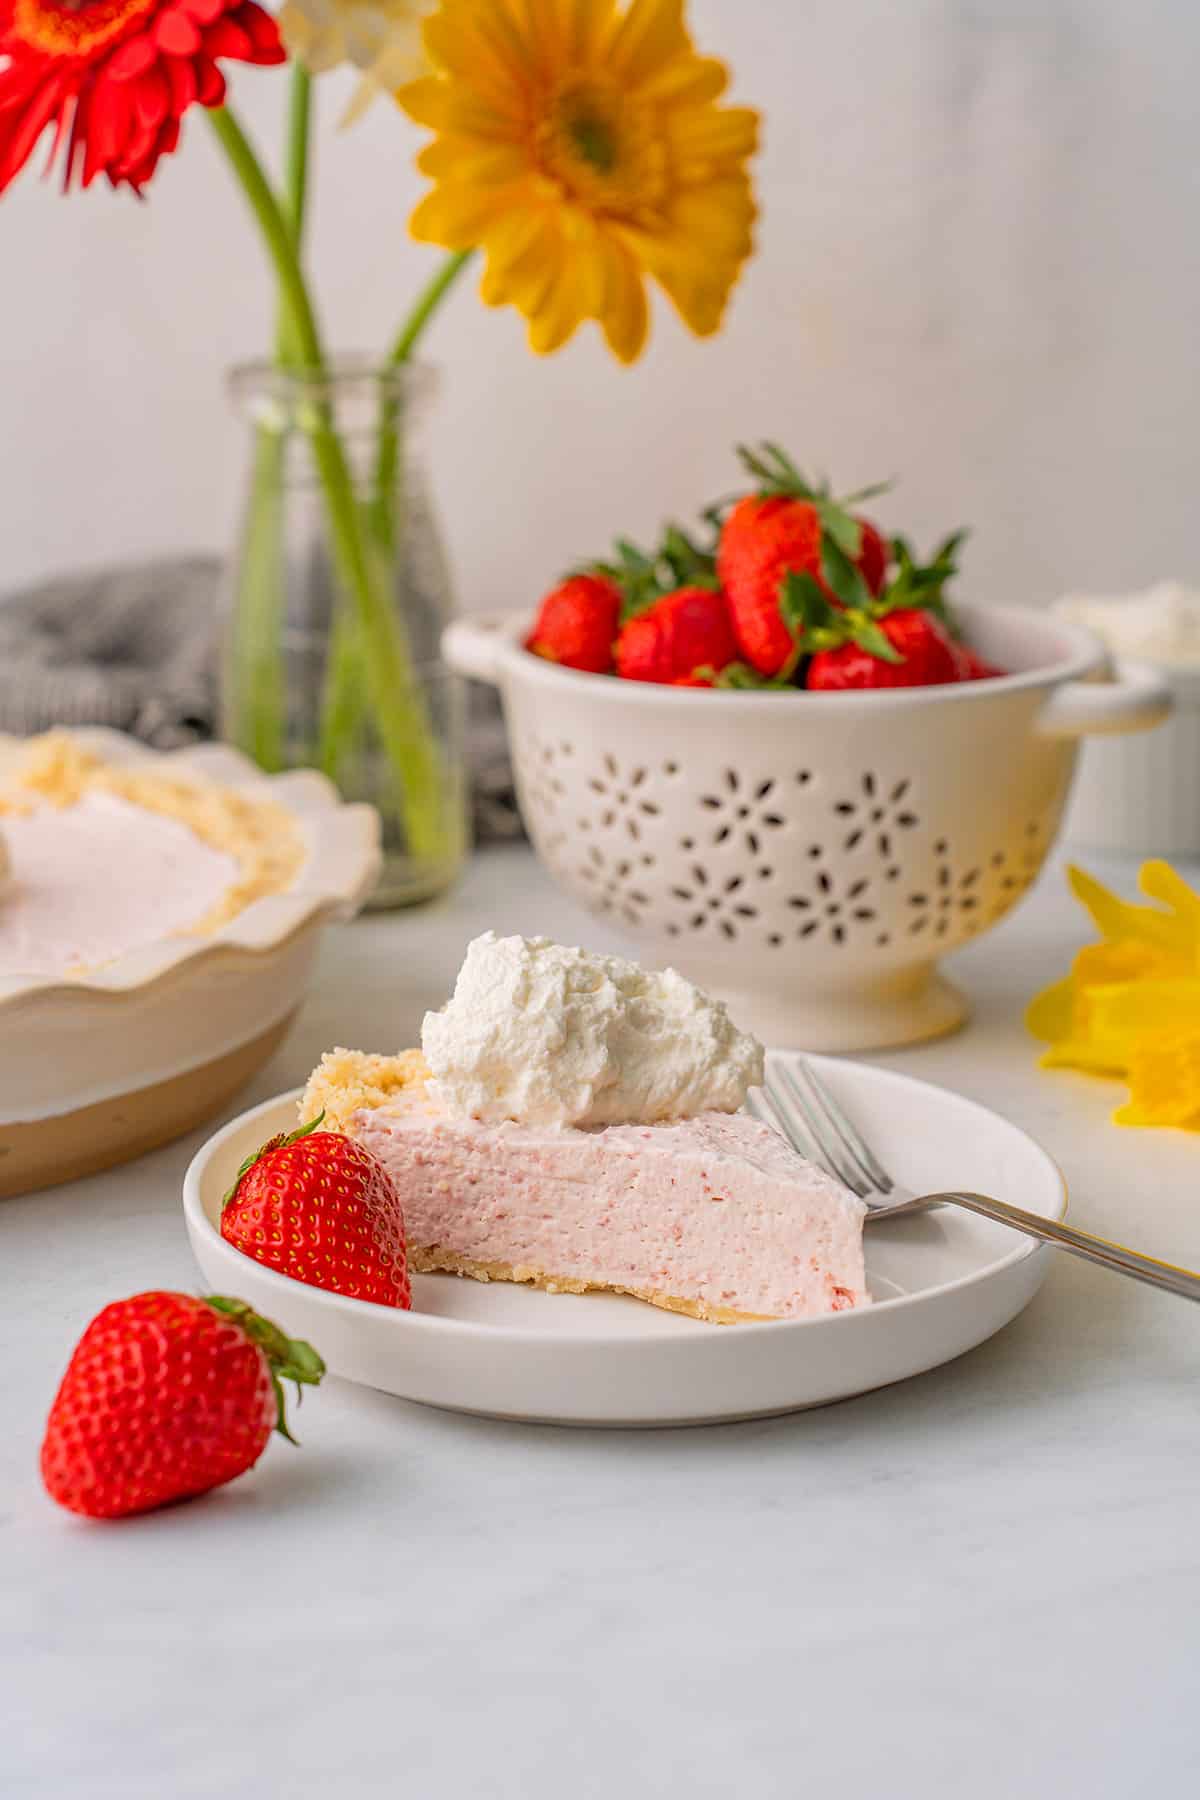 A slice of strawberry cream pie on a white plate on a gray table.